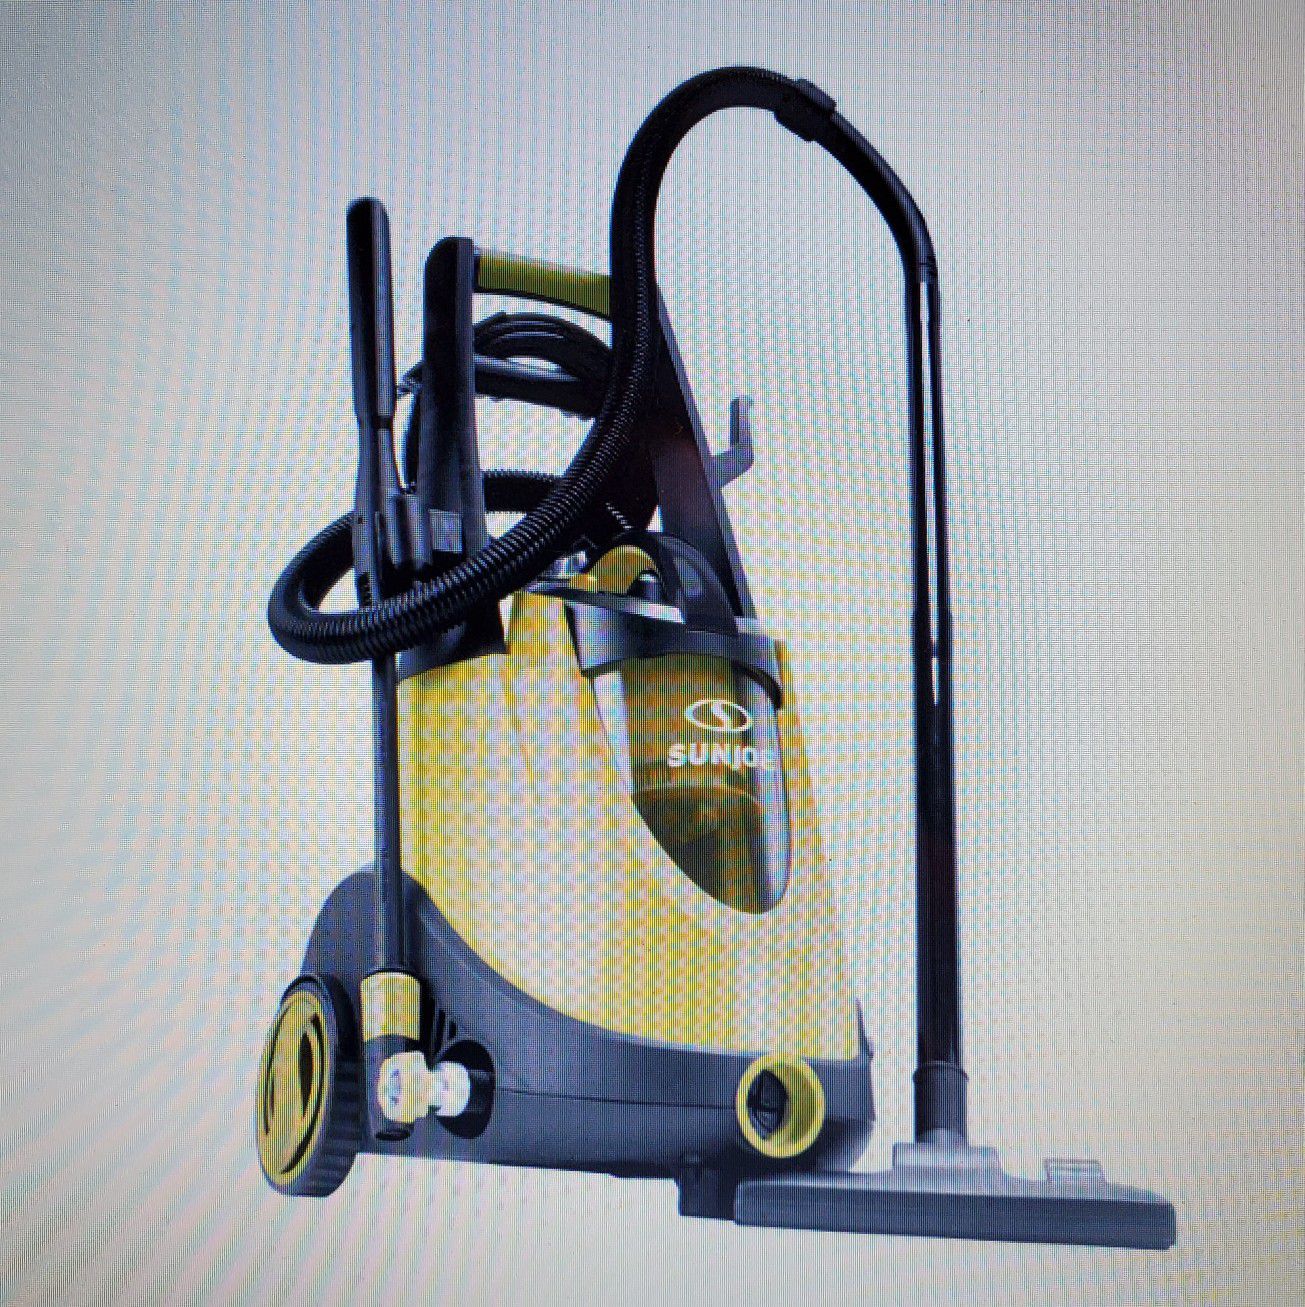 Sun Joe 2-in-1 Electric Pressure Washer 1700 PSI with Built-In Wet/Dry Vacuum - Model No. SPX7000E